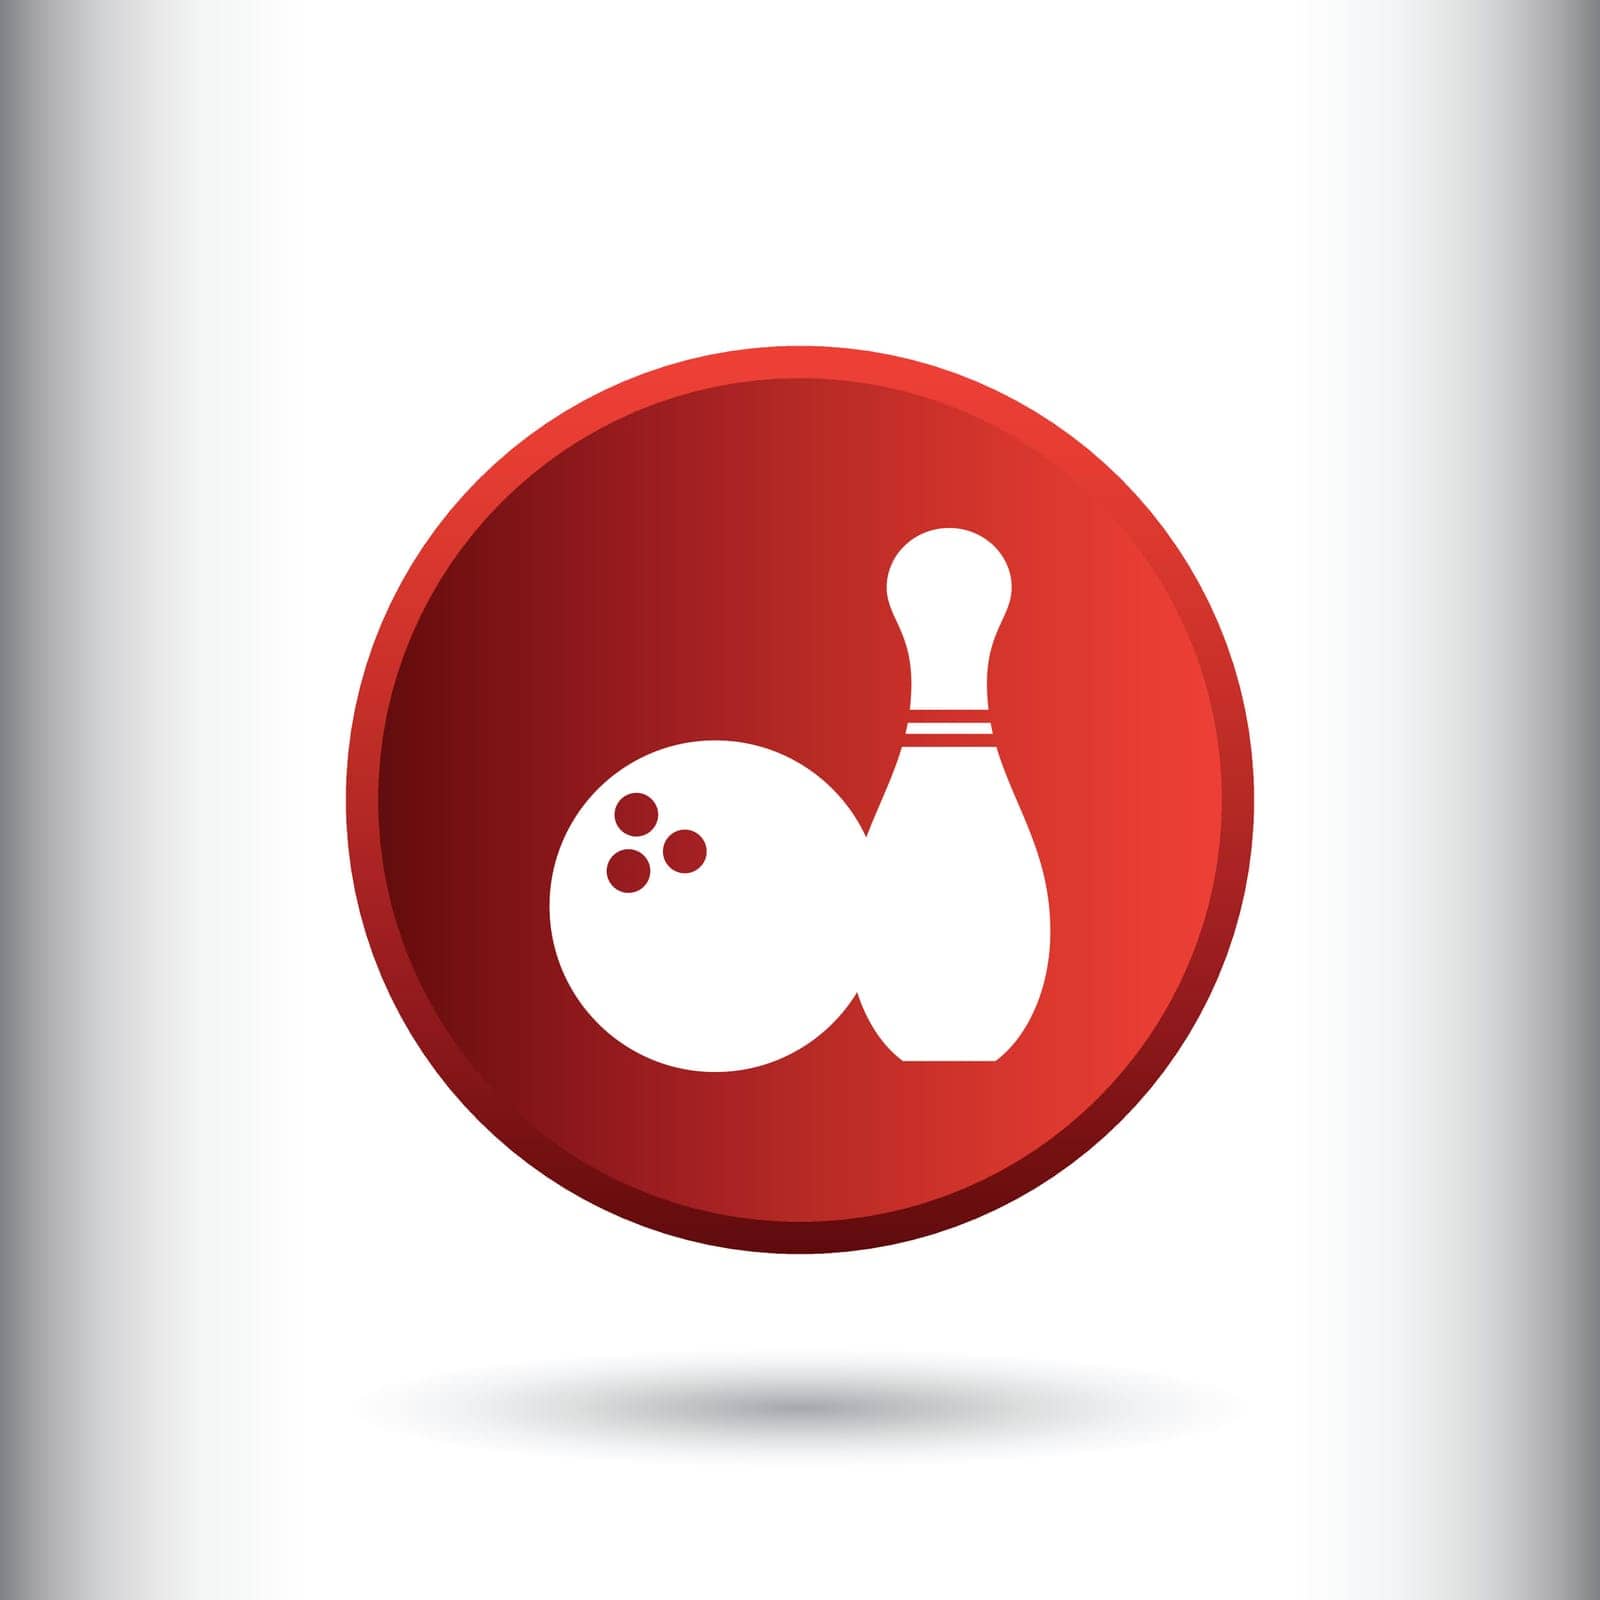 play,symbol,game,happy,concept,icon,sign,isolated,competition,bowl,bowling,speed,shot,ball,score,hit,pin,white,design,vector,win,graphic,element,shape,cartoon,recreation,impact,strike,black,retro,equipment,icons,creative,target,background,silhouette,illustration,sport,fun,object,hobby